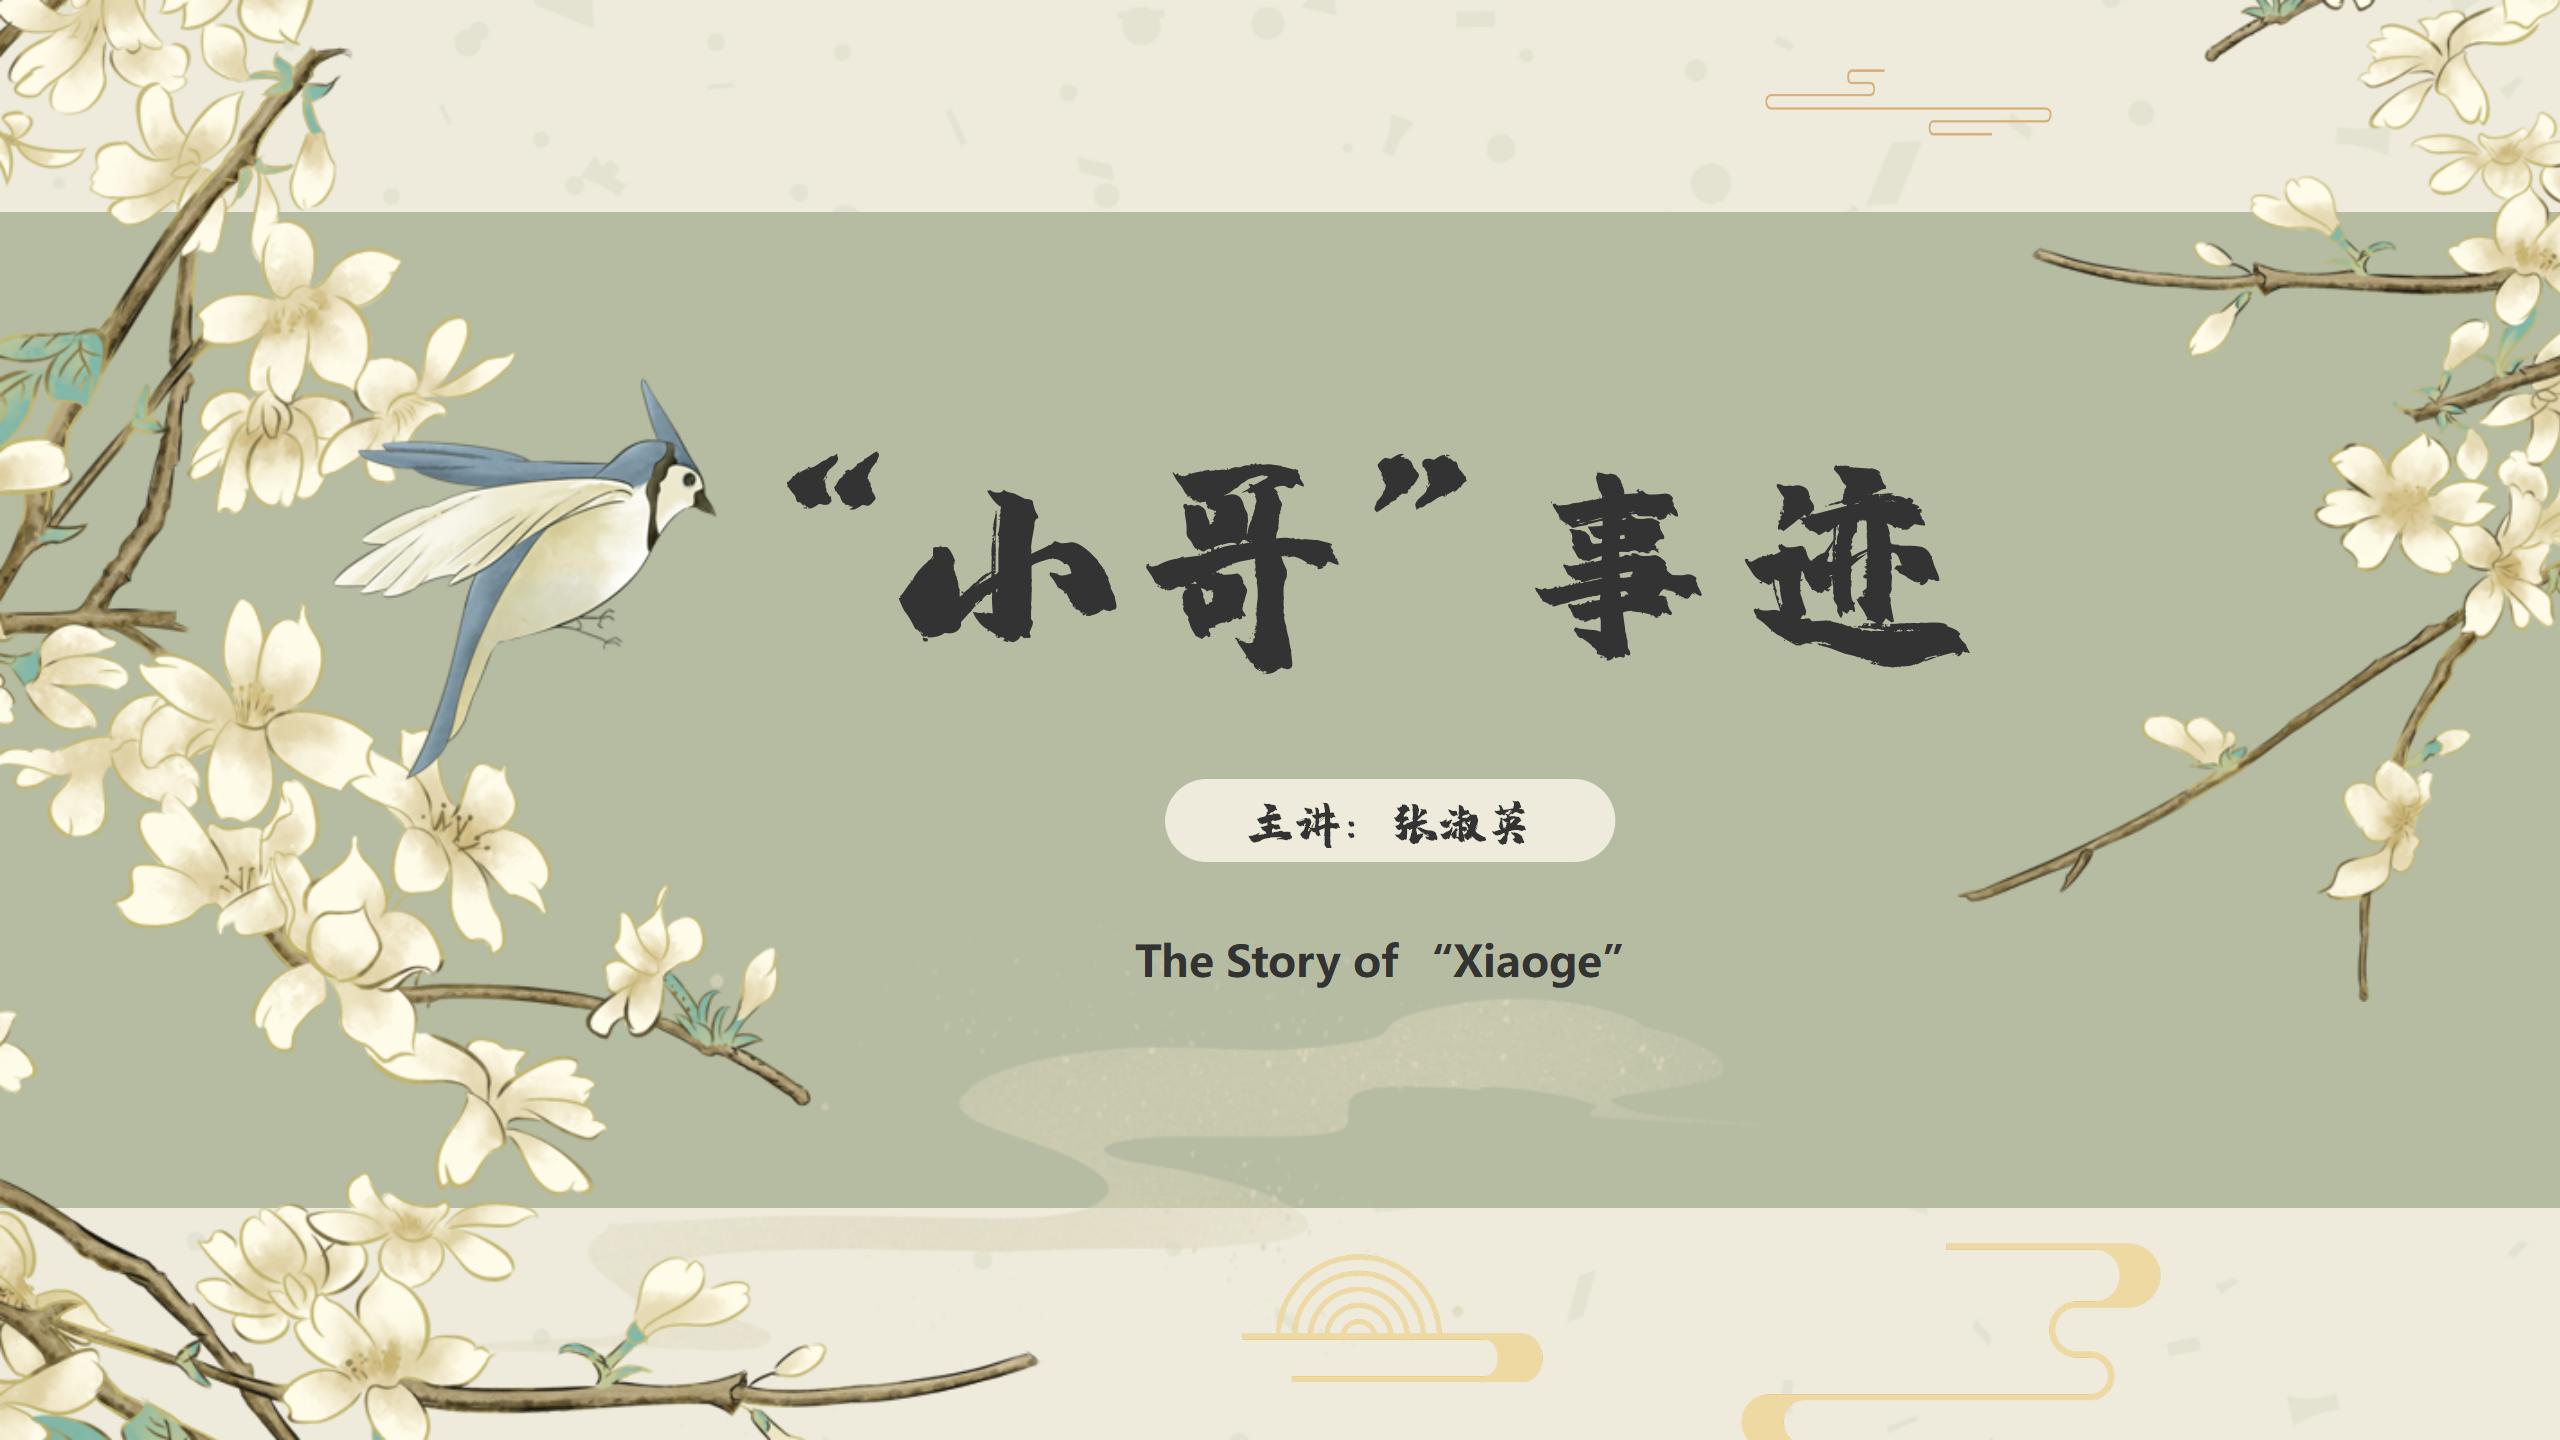 The Story of “Xiaoge”